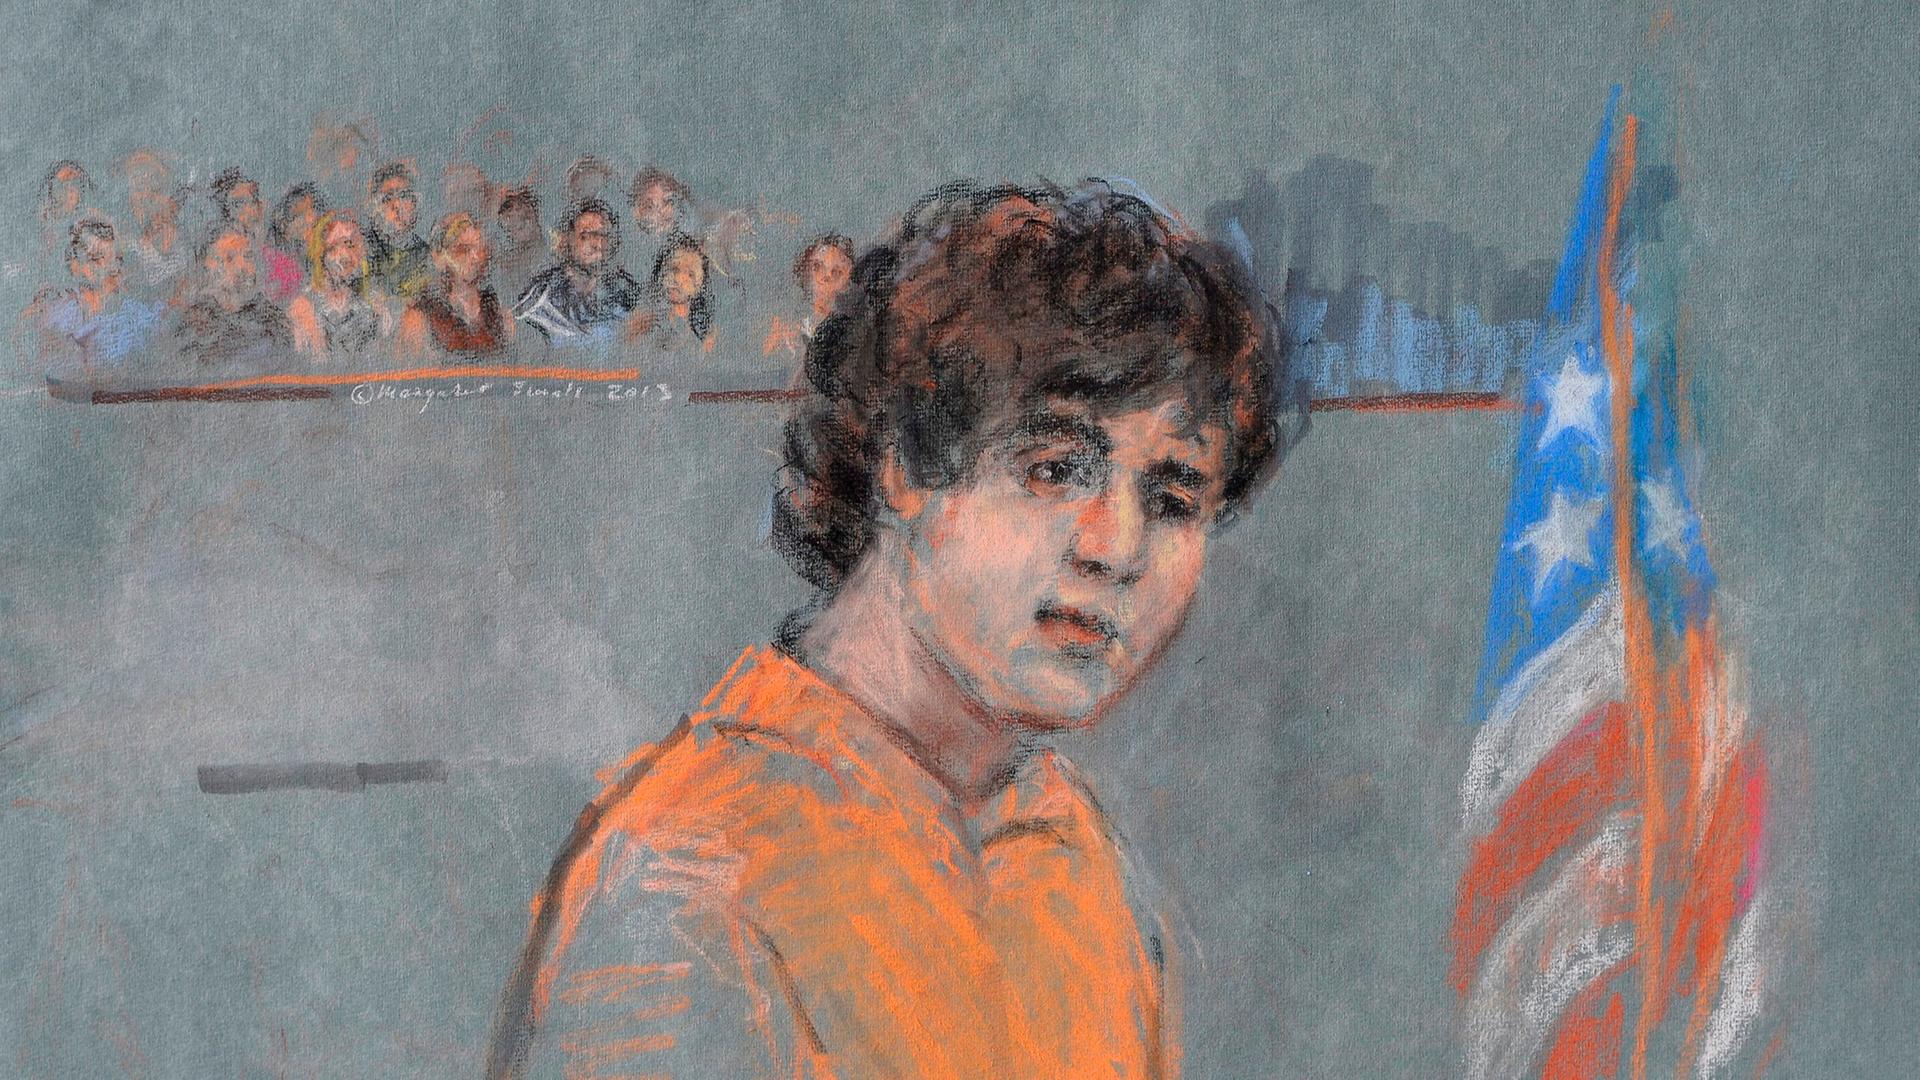 epa03783394 An artist's drawing of Dzhokhar Tsarnaev during his arraignment on 30 federal charges stemming from the events surrounding the Boston Marathon Bombing, in the Joseph Moakley Federal Court House in Boston, Massachusetts, USA, 10 July 2013. Tsar